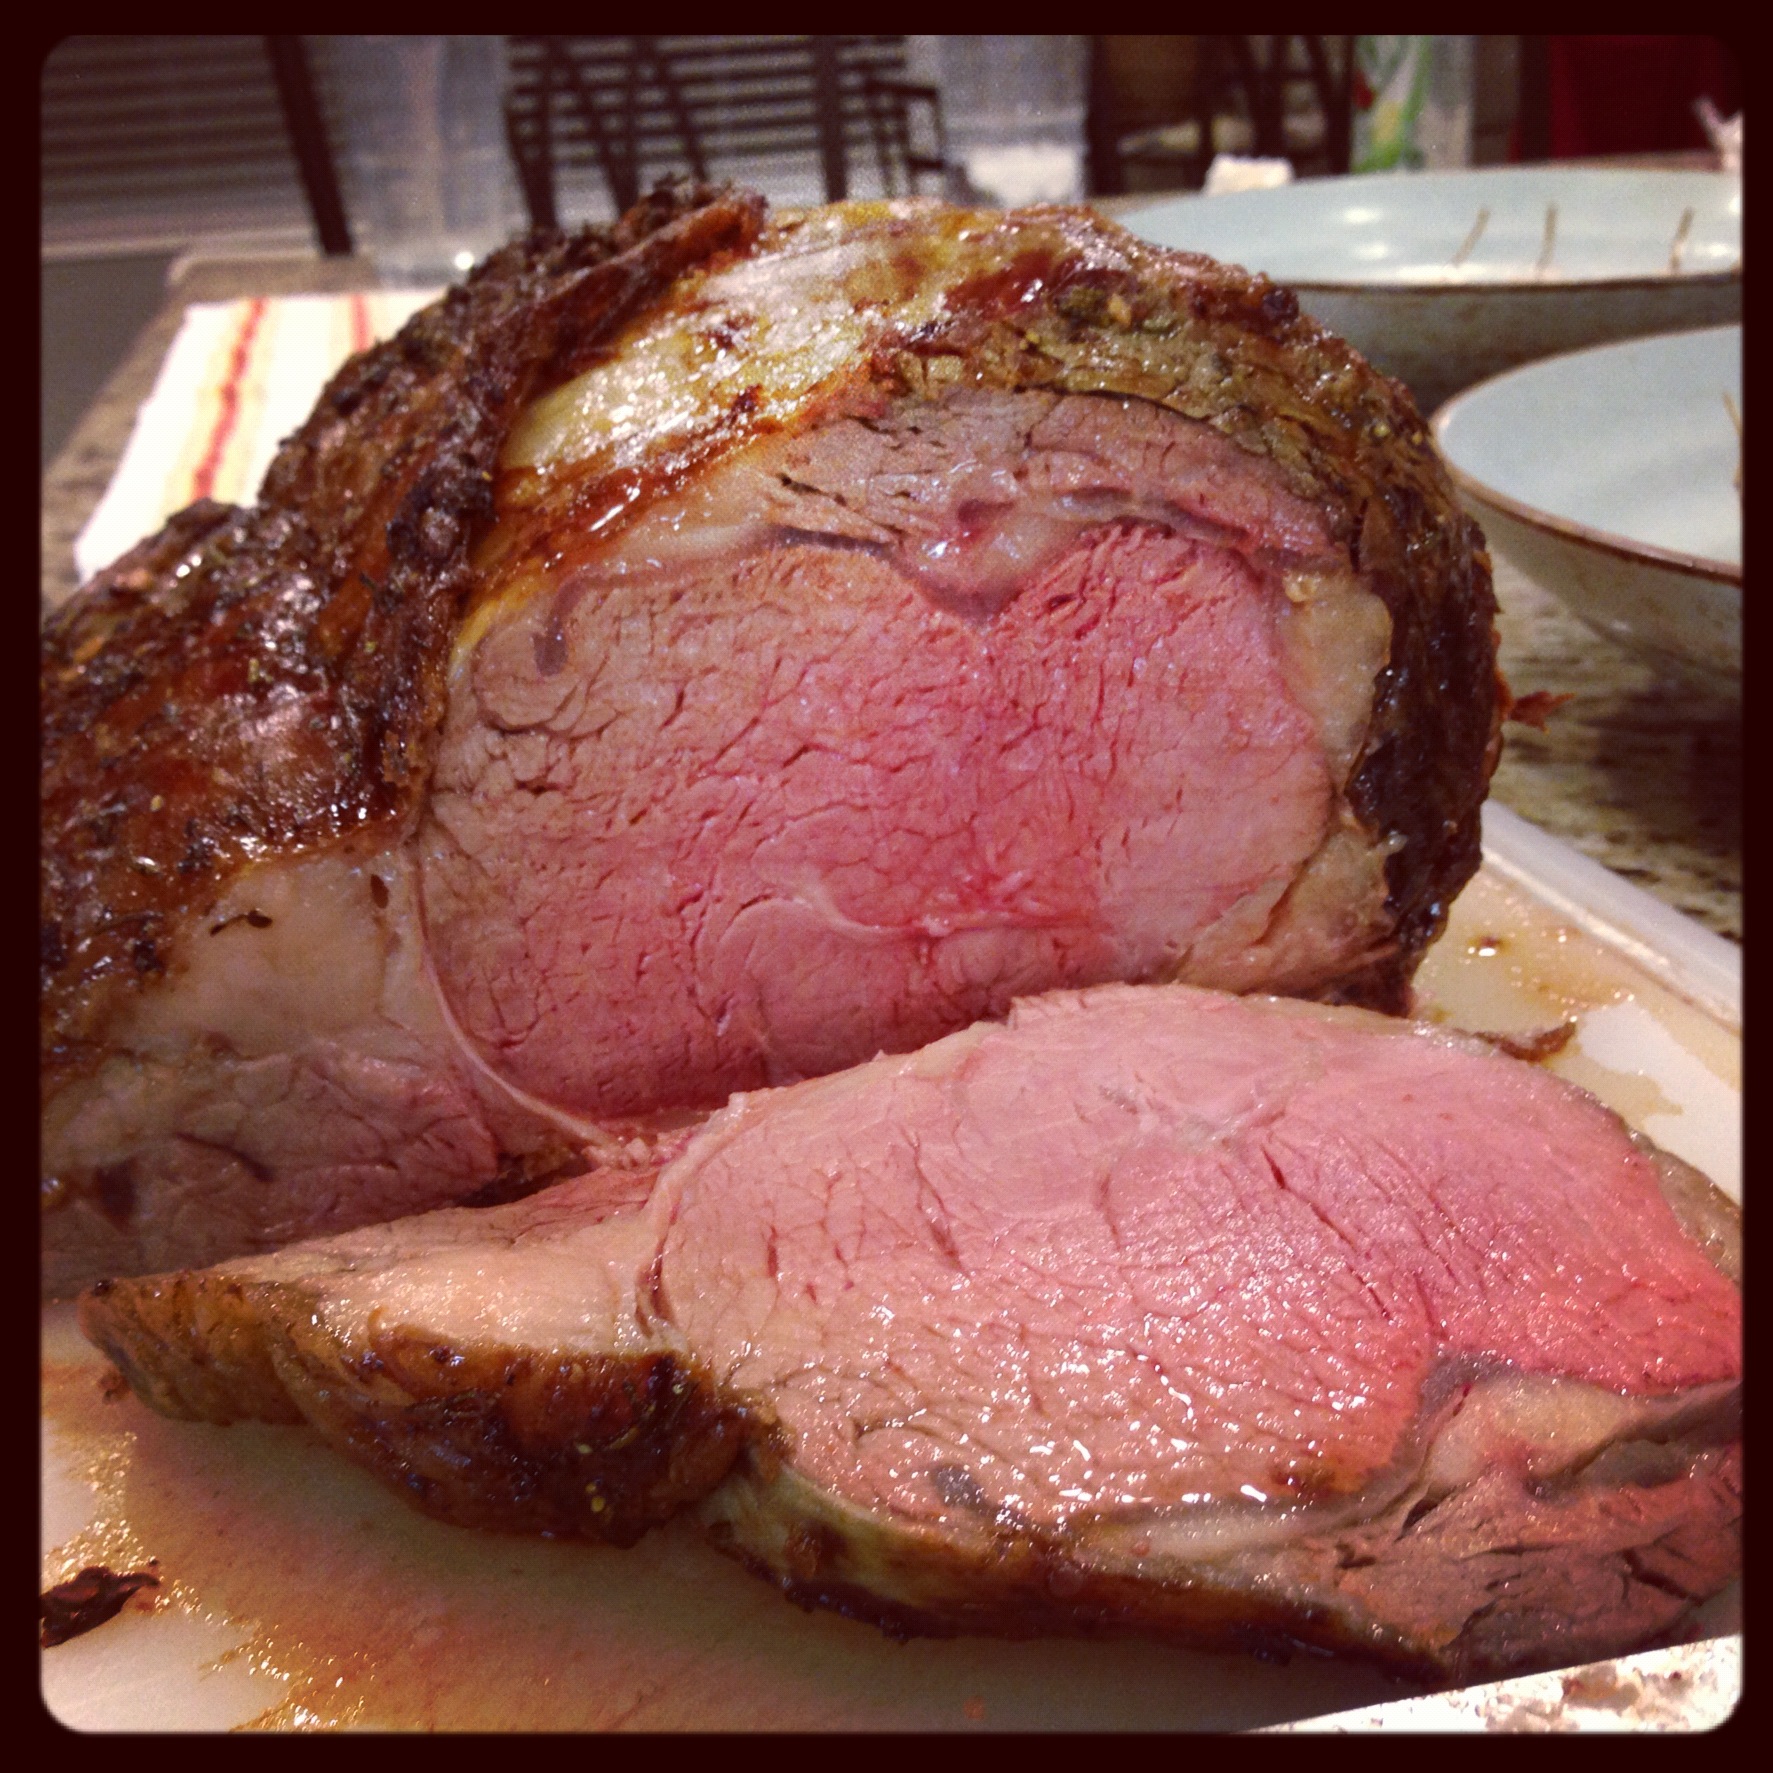 Christmas Dinner How To Make Prime Rib Standing Rib Roast With Au Jus And Yorkshire Pudding The 350 Degree Oven